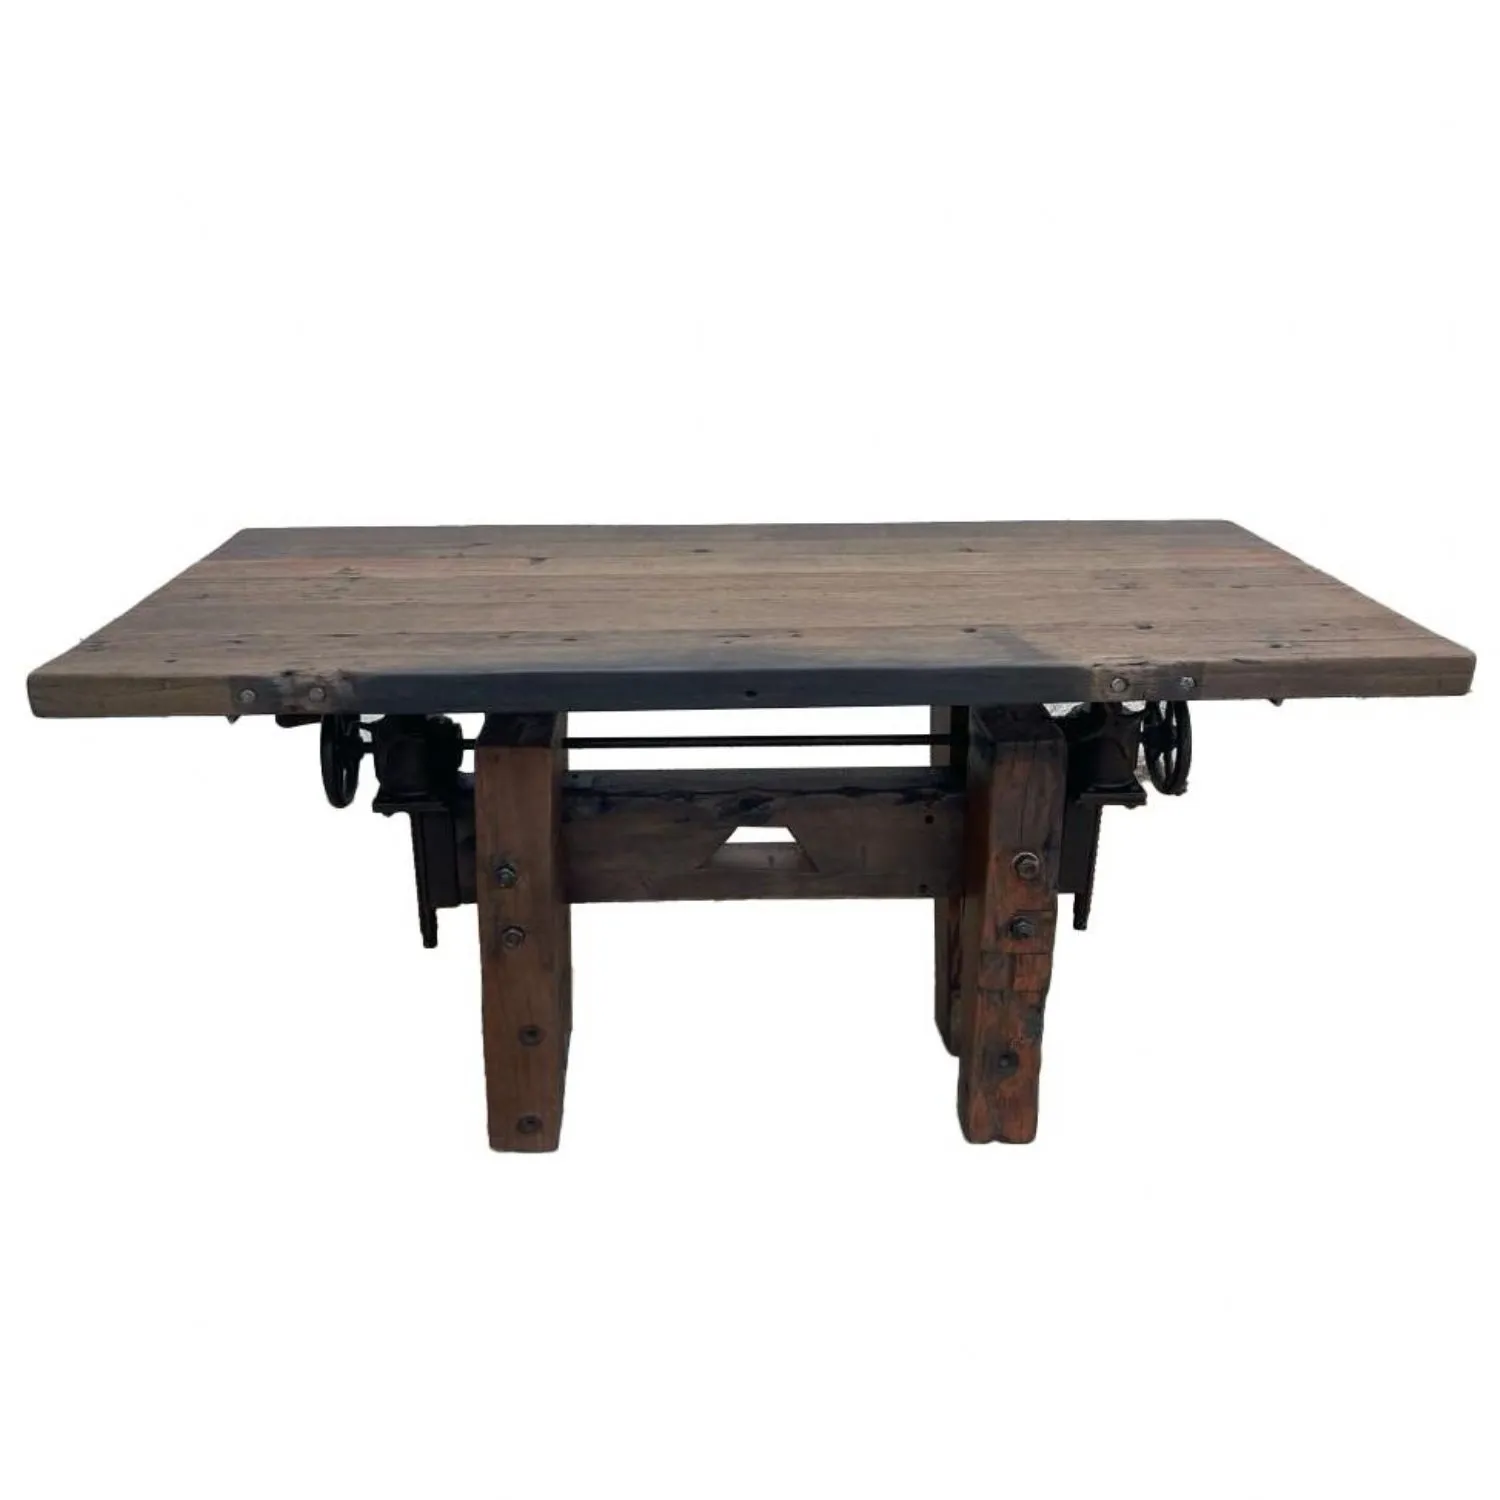 Adjustable Reclaimed Wood and Metal Table